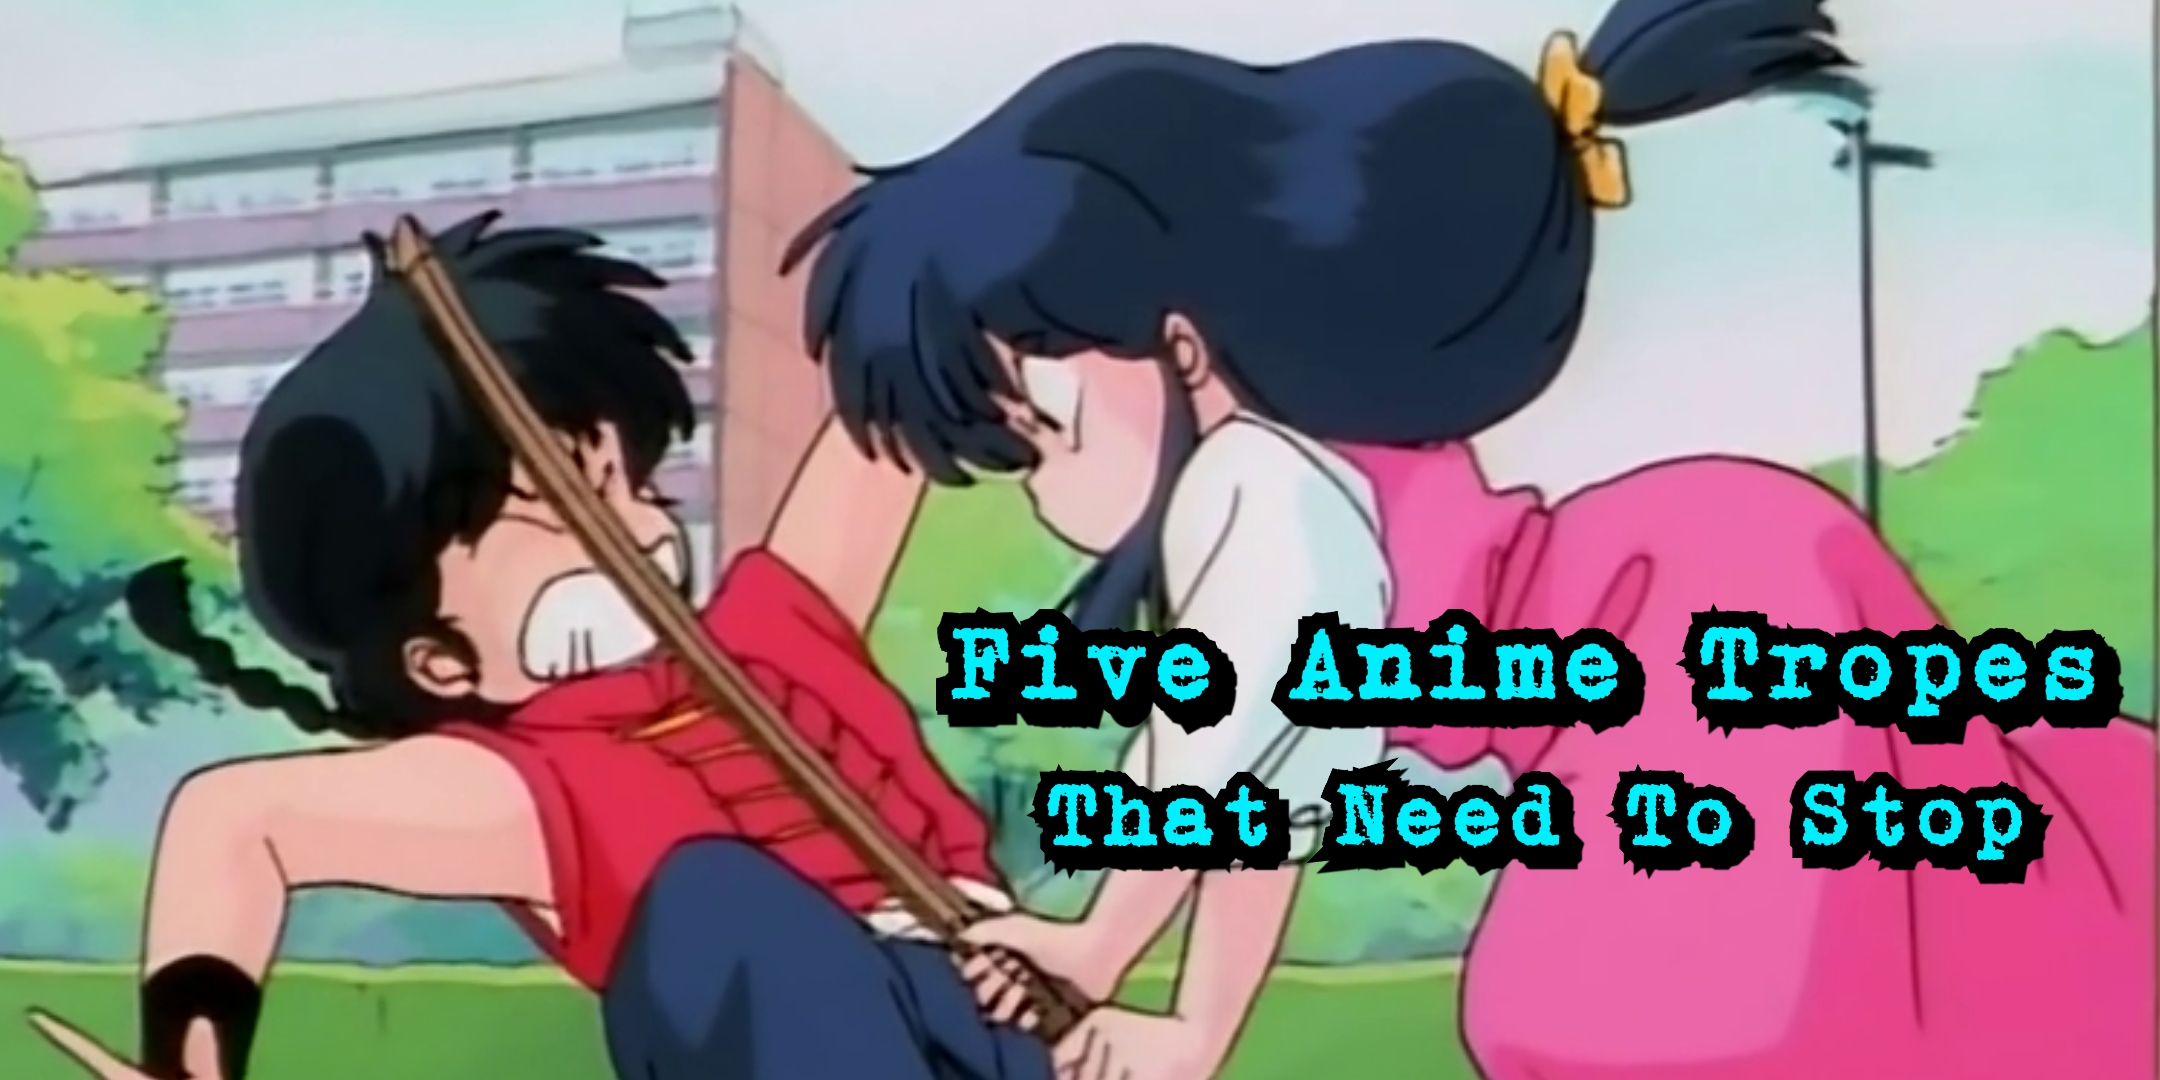 15 Common Anime Tropes You See Everywhere